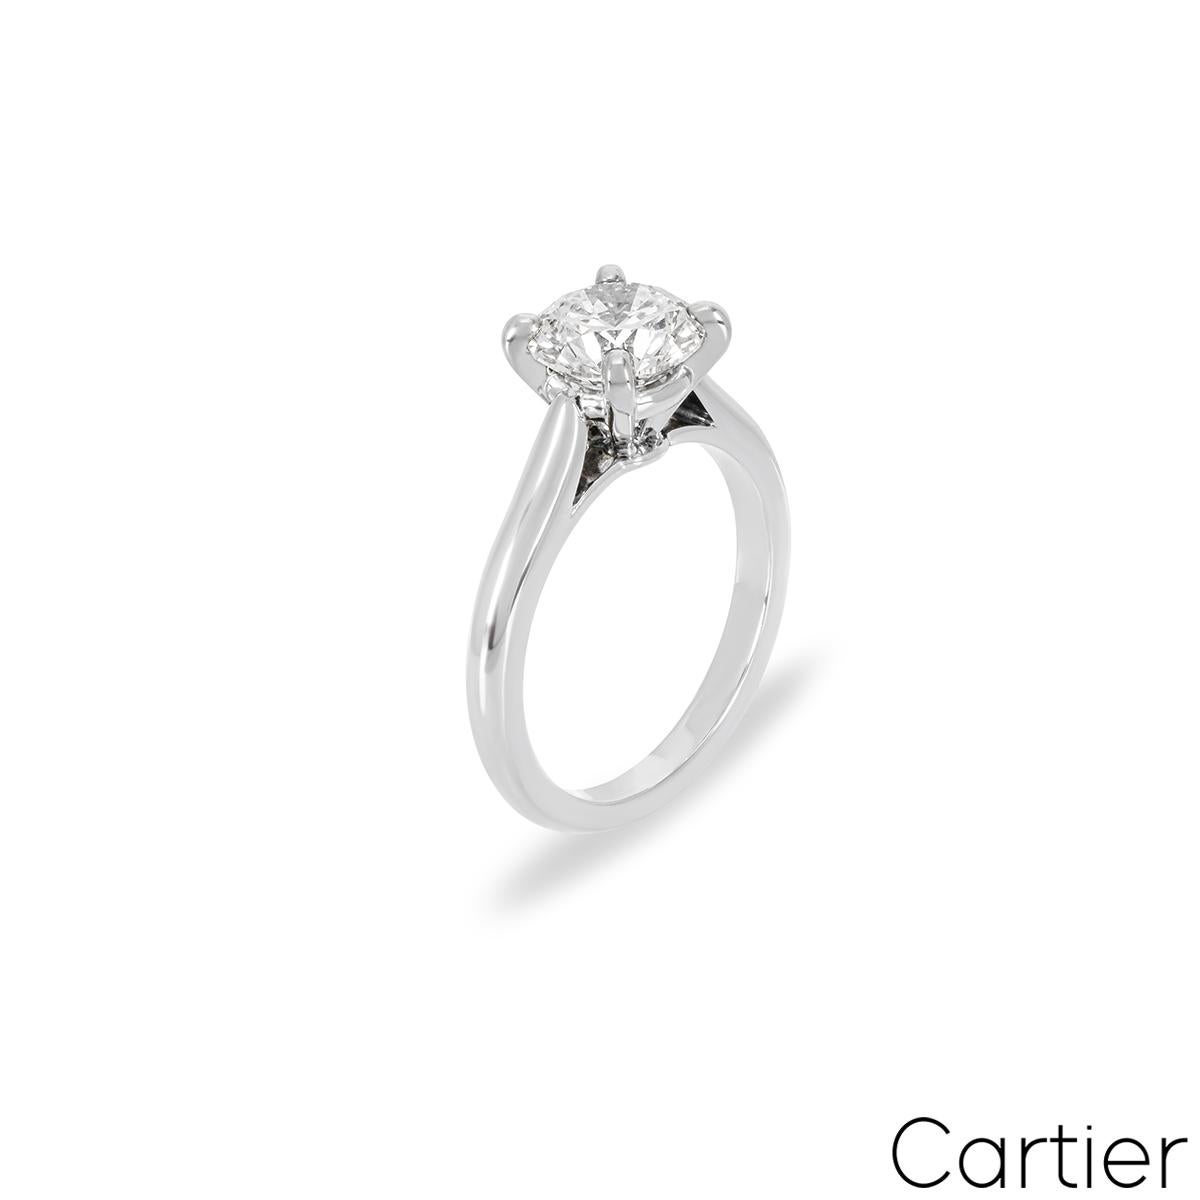 A captivating platinum diamond engagement ring by Cartier from the Solitaire 1895 collection. The ring comprises of a round brilliant cut diamond in a four prong setting weighing 1.37ct, G colour and VVS1 clarity. The diamond scores an excellent